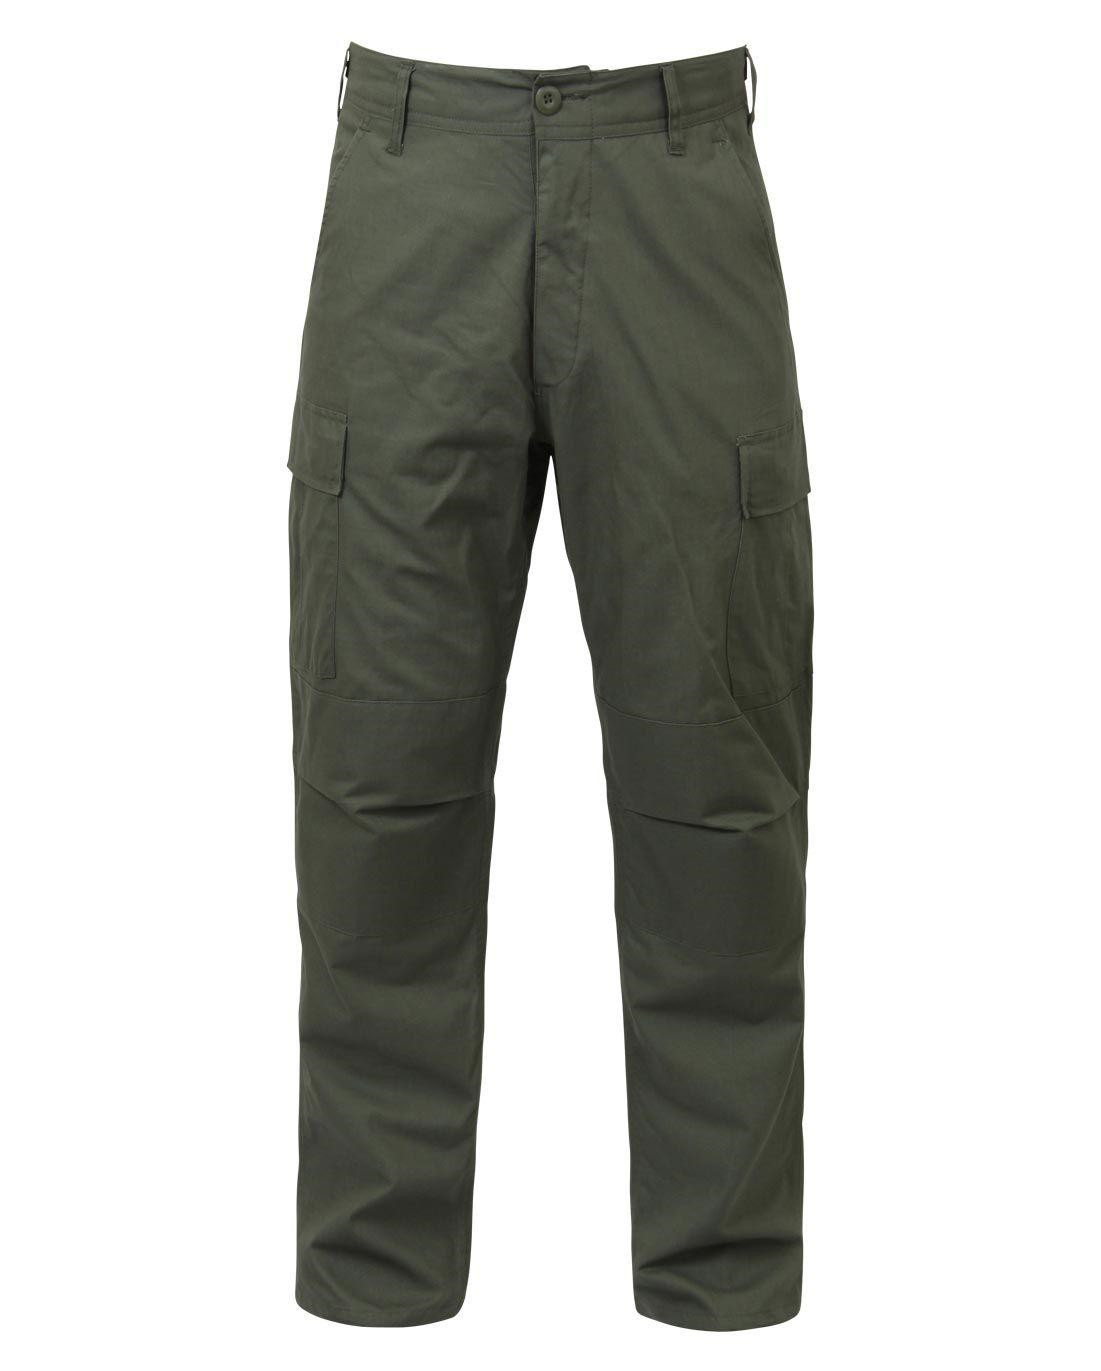 Rothco BDU Bukser i Rip-Stop (Oliven, X-Large / 35"-43")